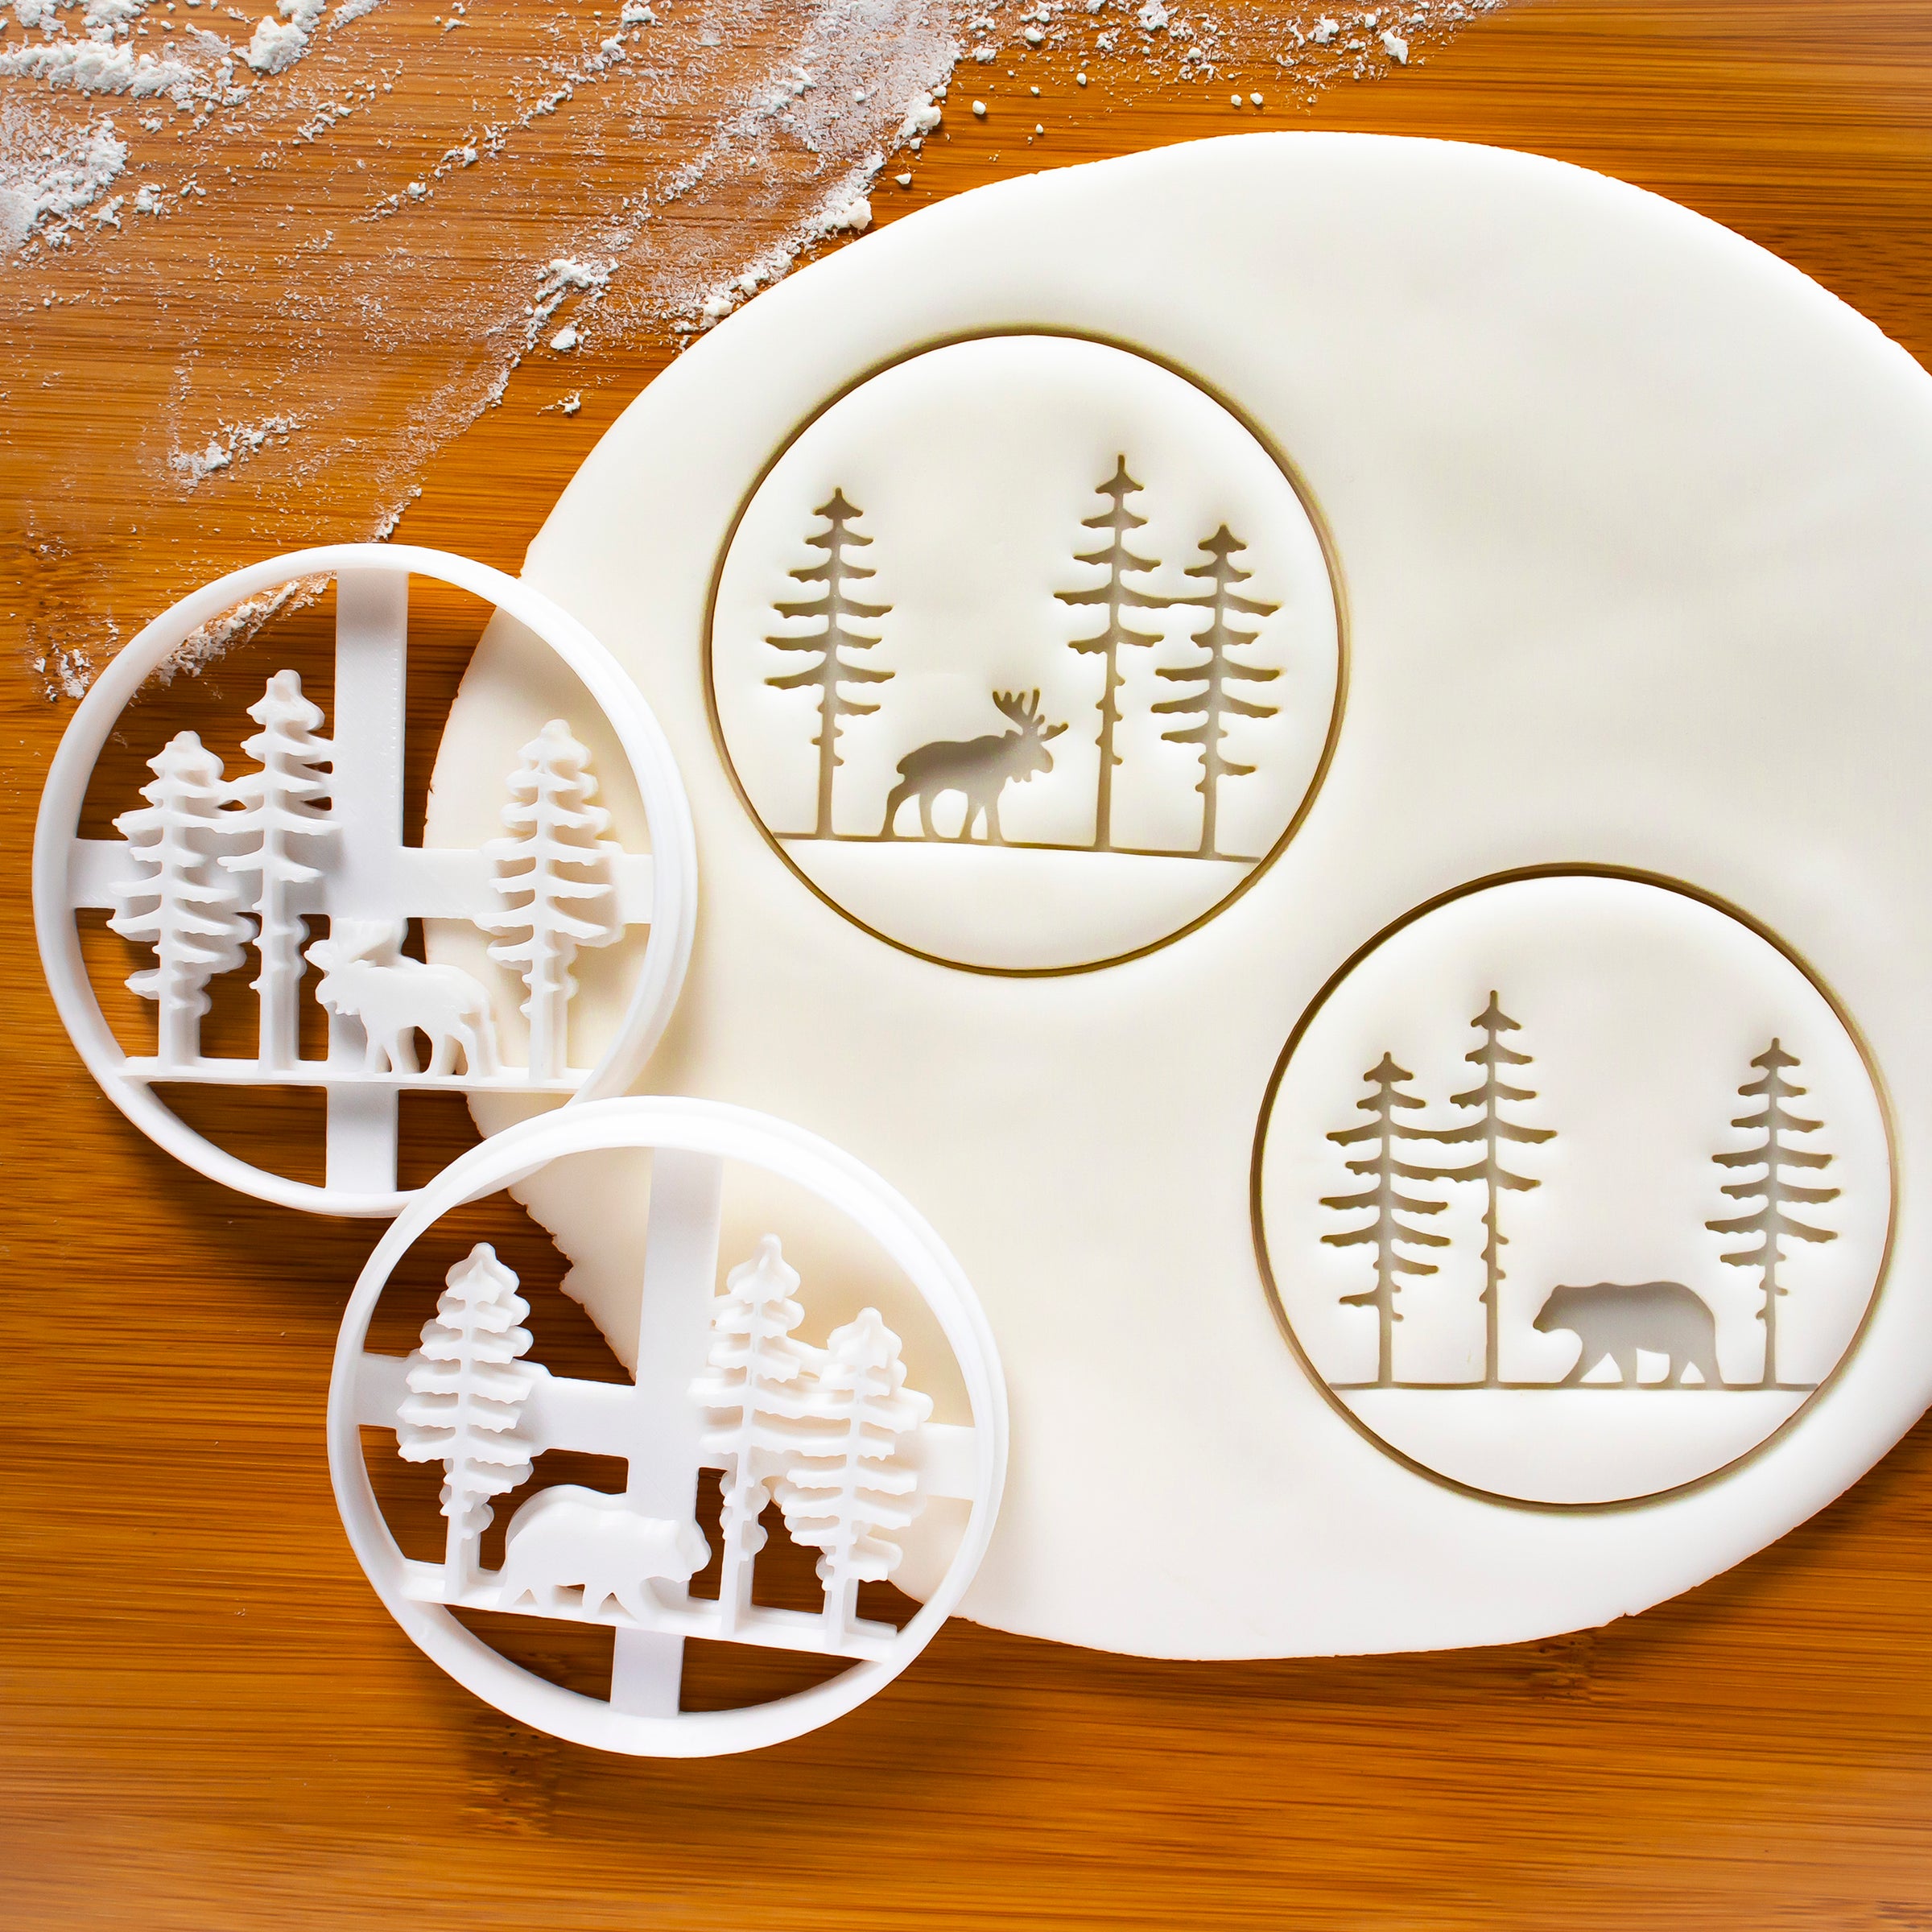 Woodland Bear Cookie Cutter – Cut It Out Cutters